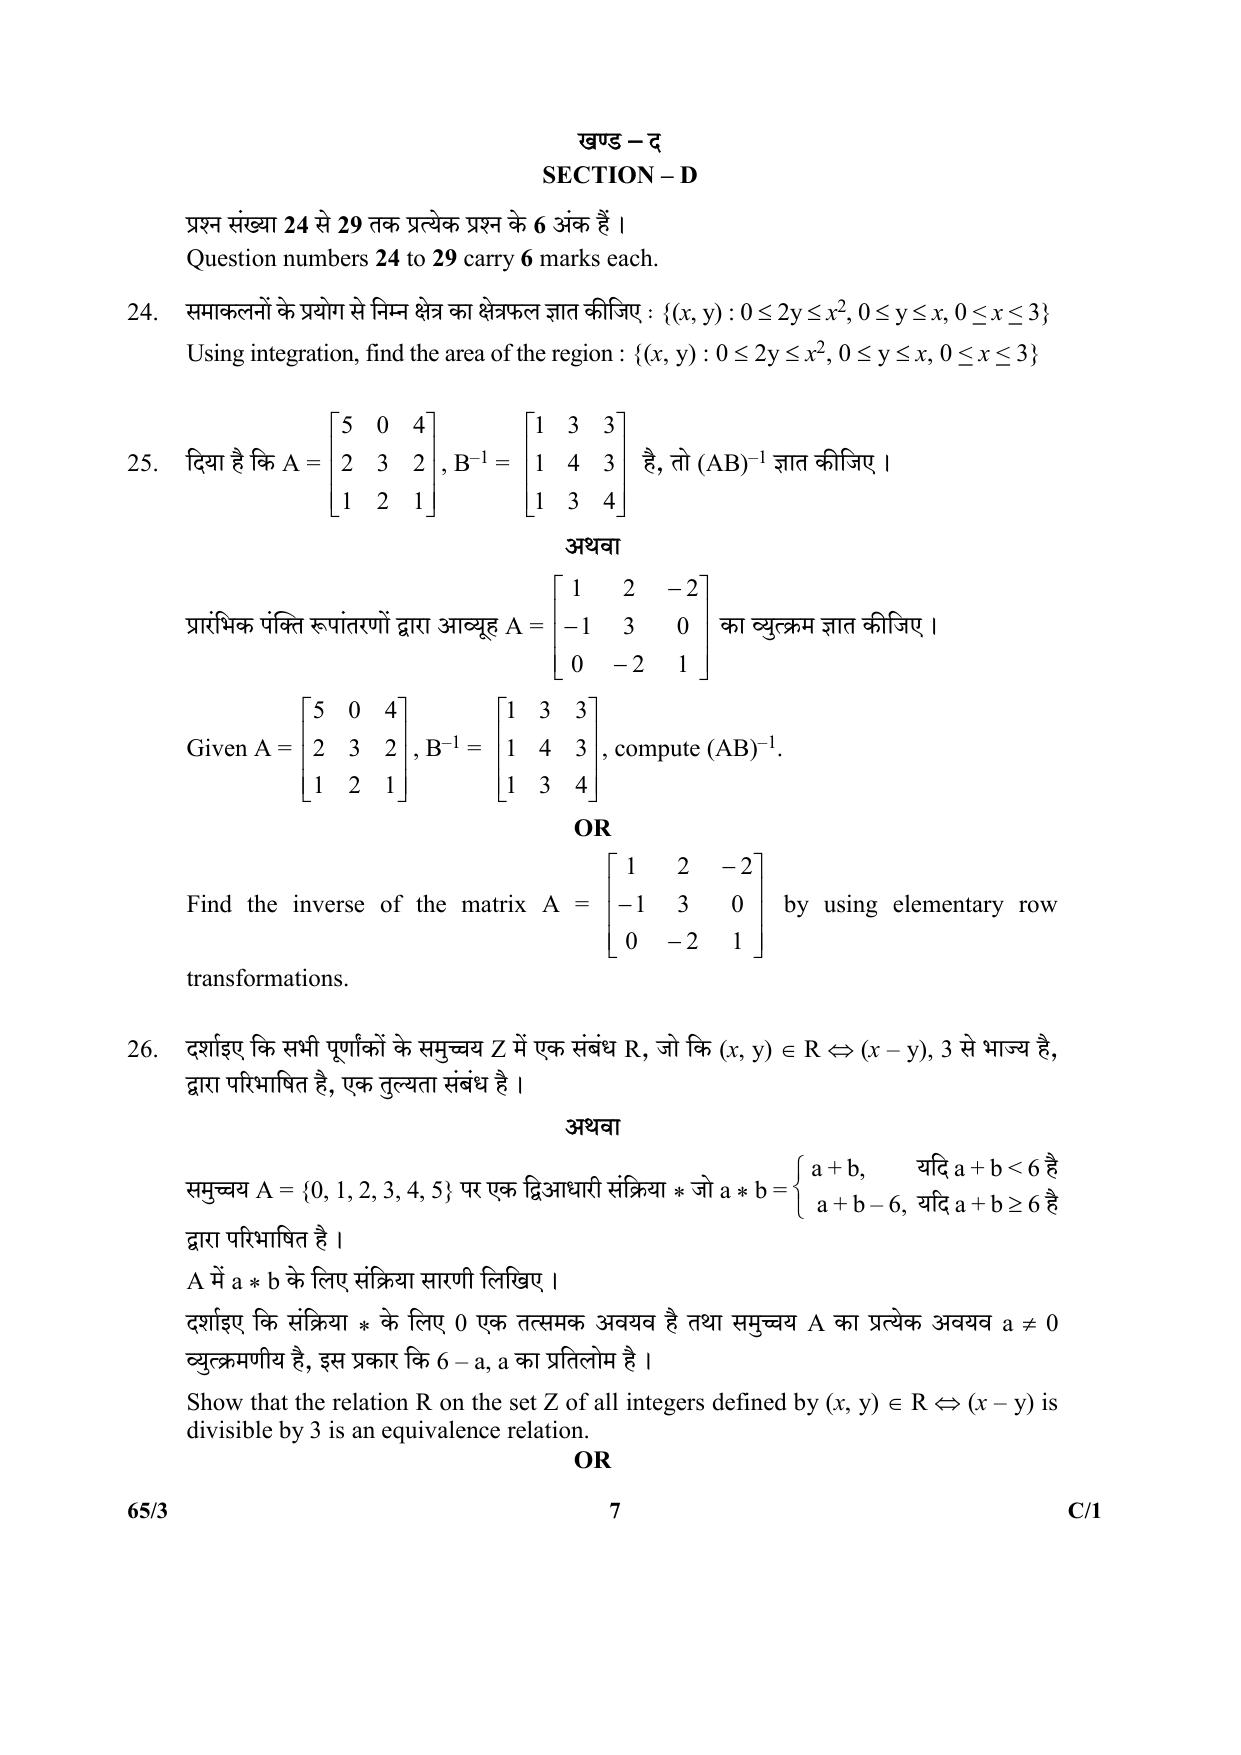 CBSE Class 12 65-3 (Mathematics) 2018 Compartment Question Paper - Page 7